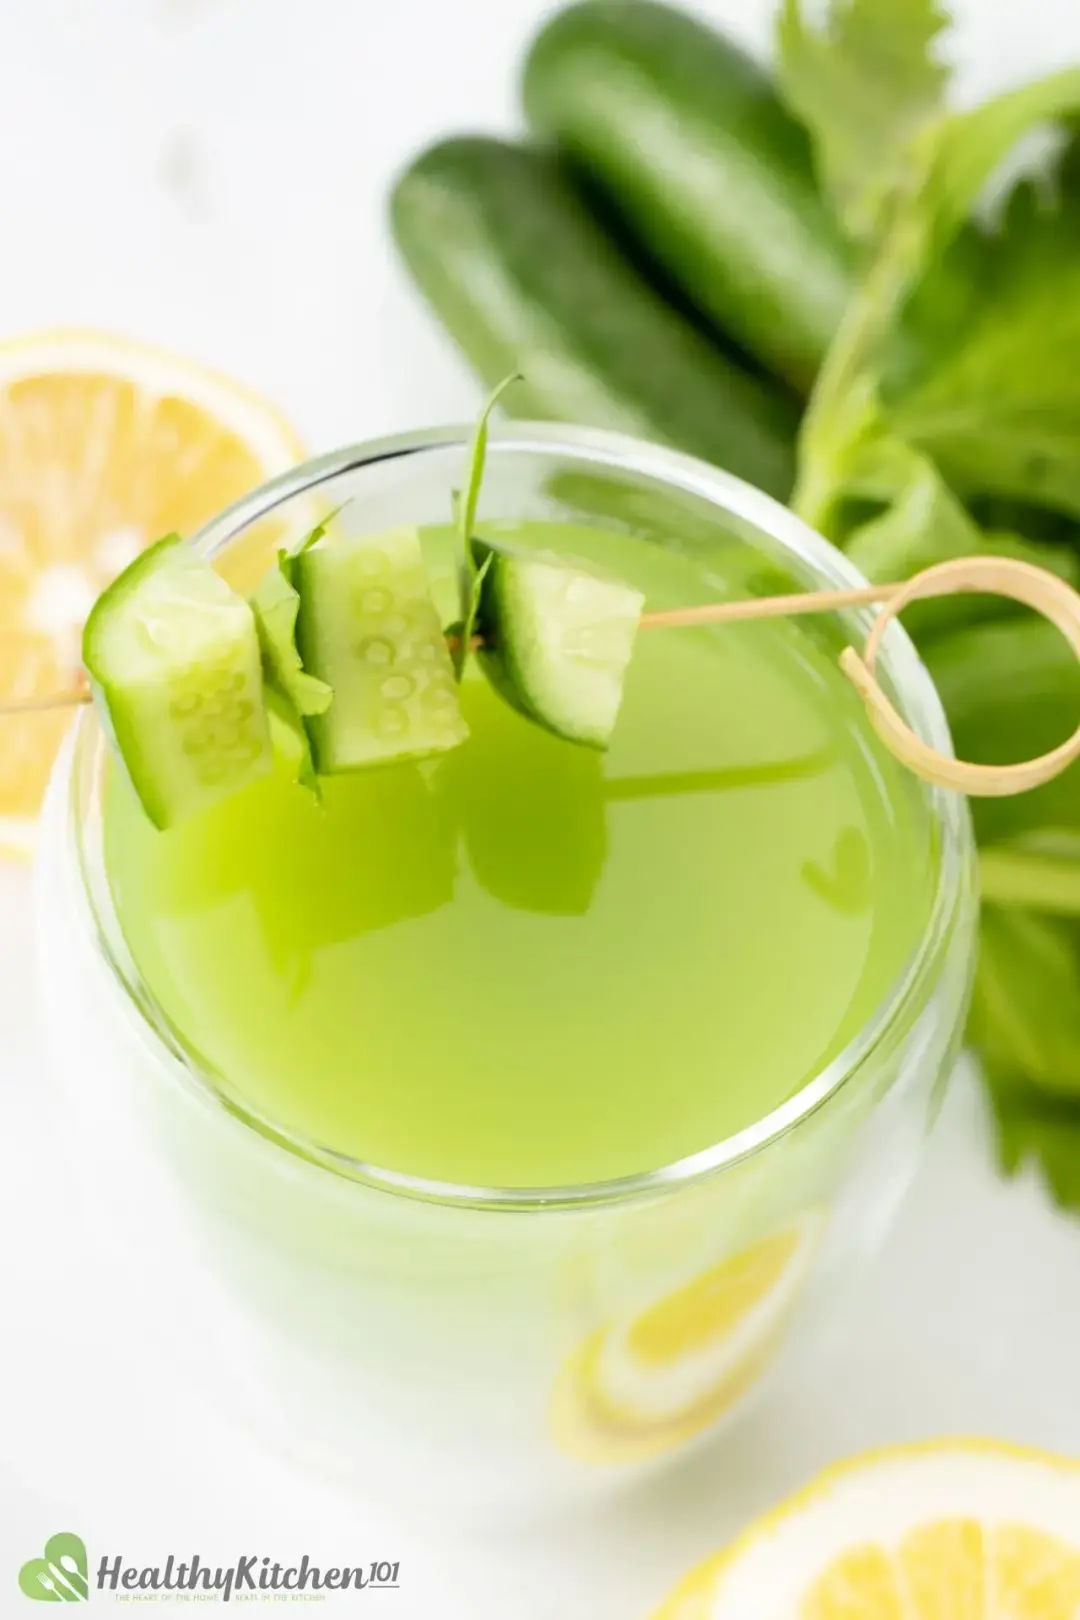 A close-up shot of a cucumber celery drink topped with skewered cucumber and next to whole cucumbers